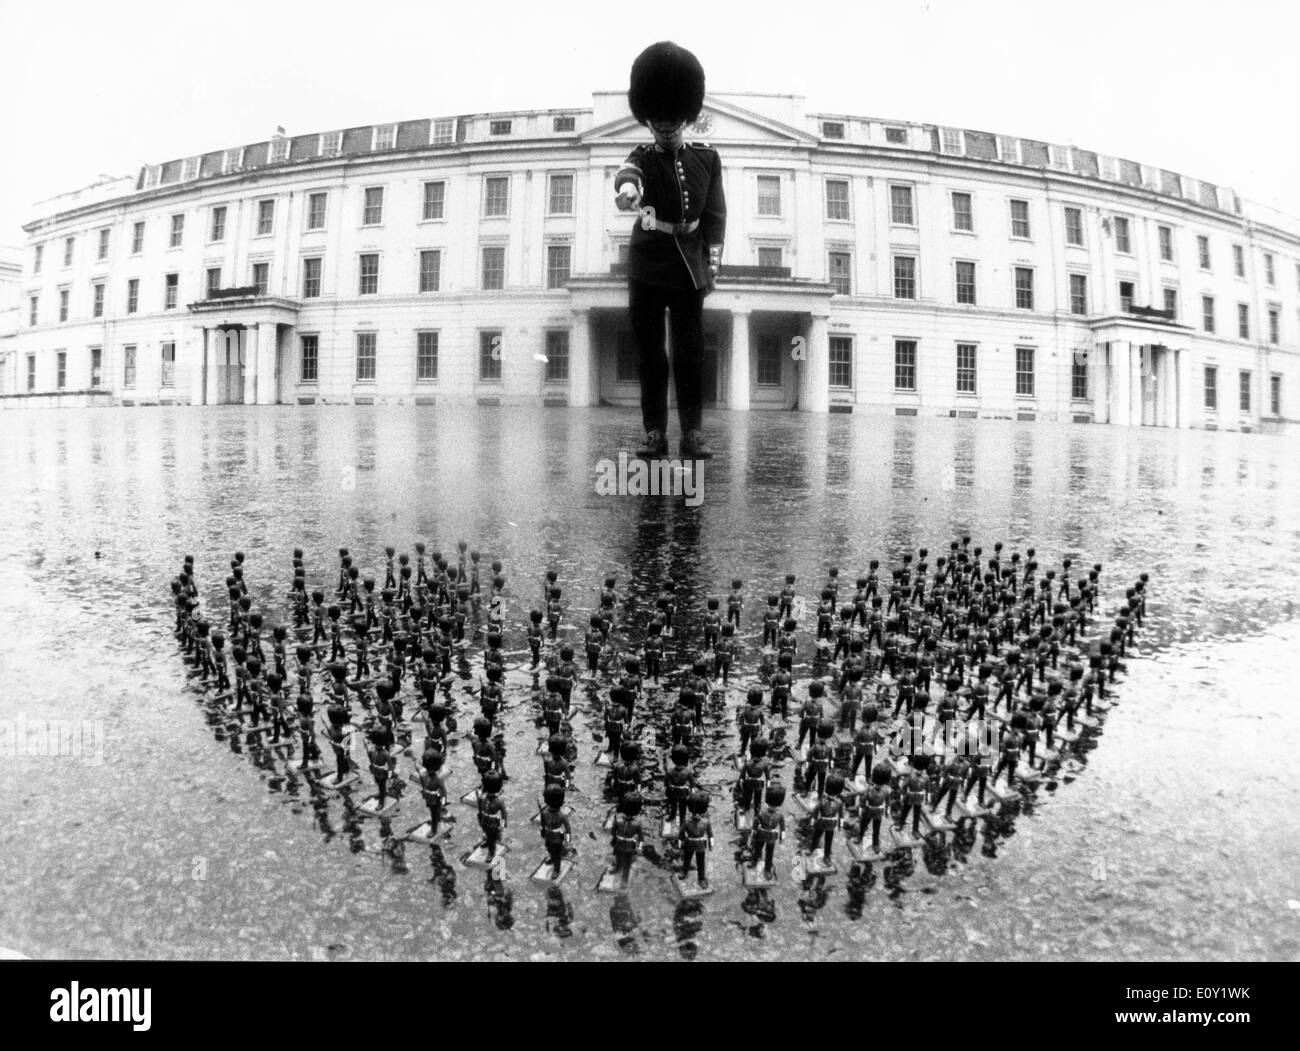 Guard with toy soldiers in front of palace Stock Photo